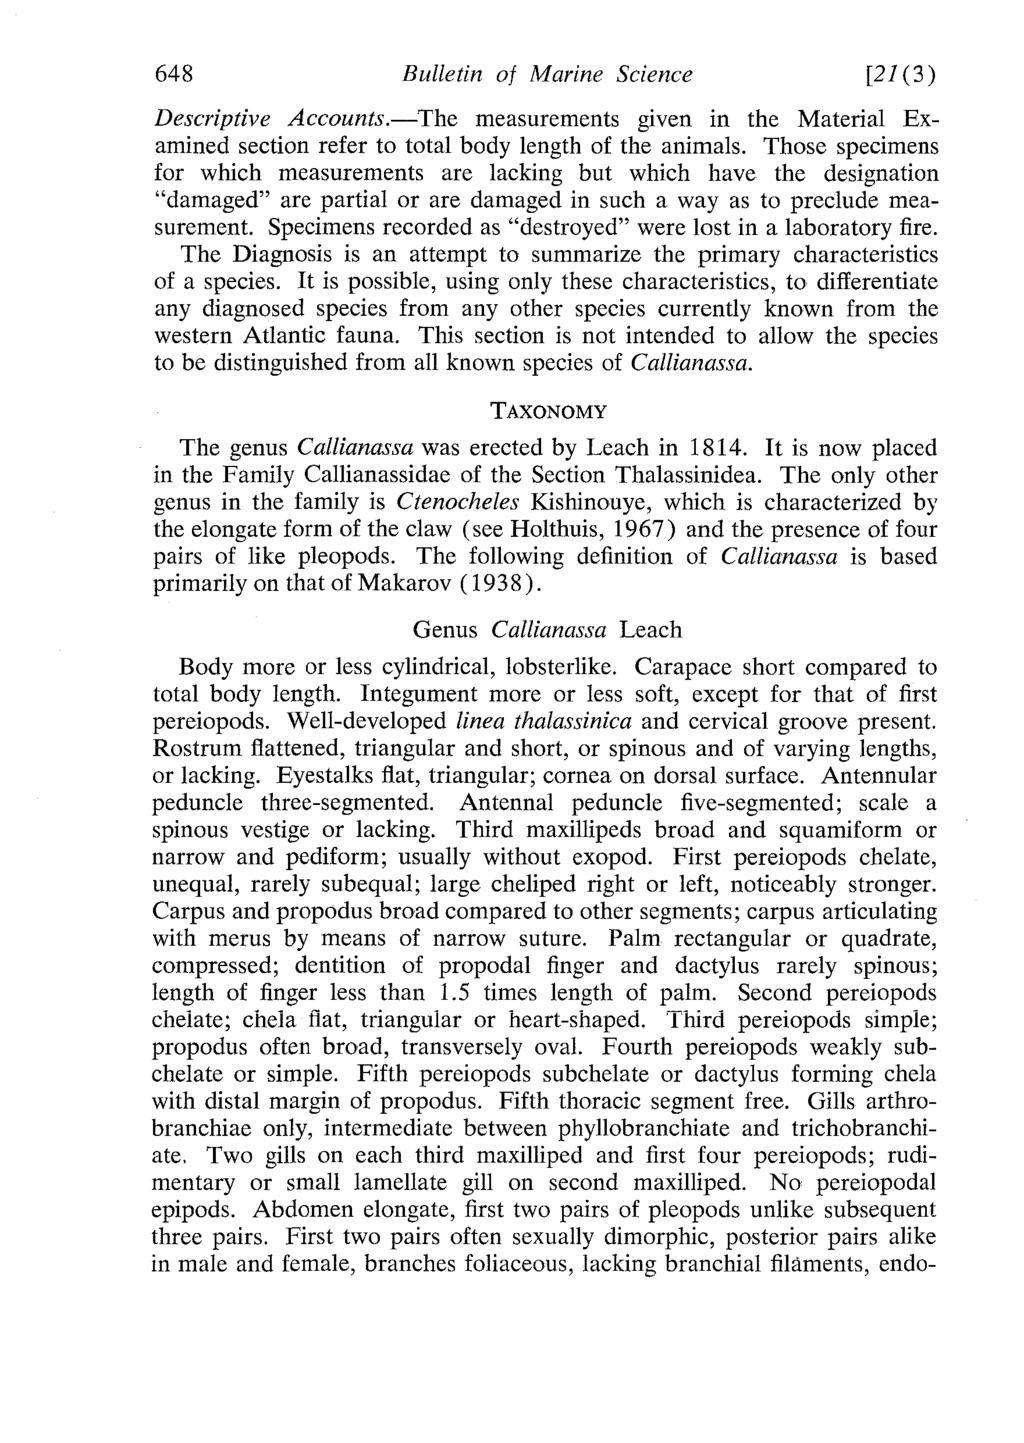 648 Bulletin of Marine Science [27(3) Descriptive Accounts. The measurements given in the Material Examined section refer to total body length of the animals.